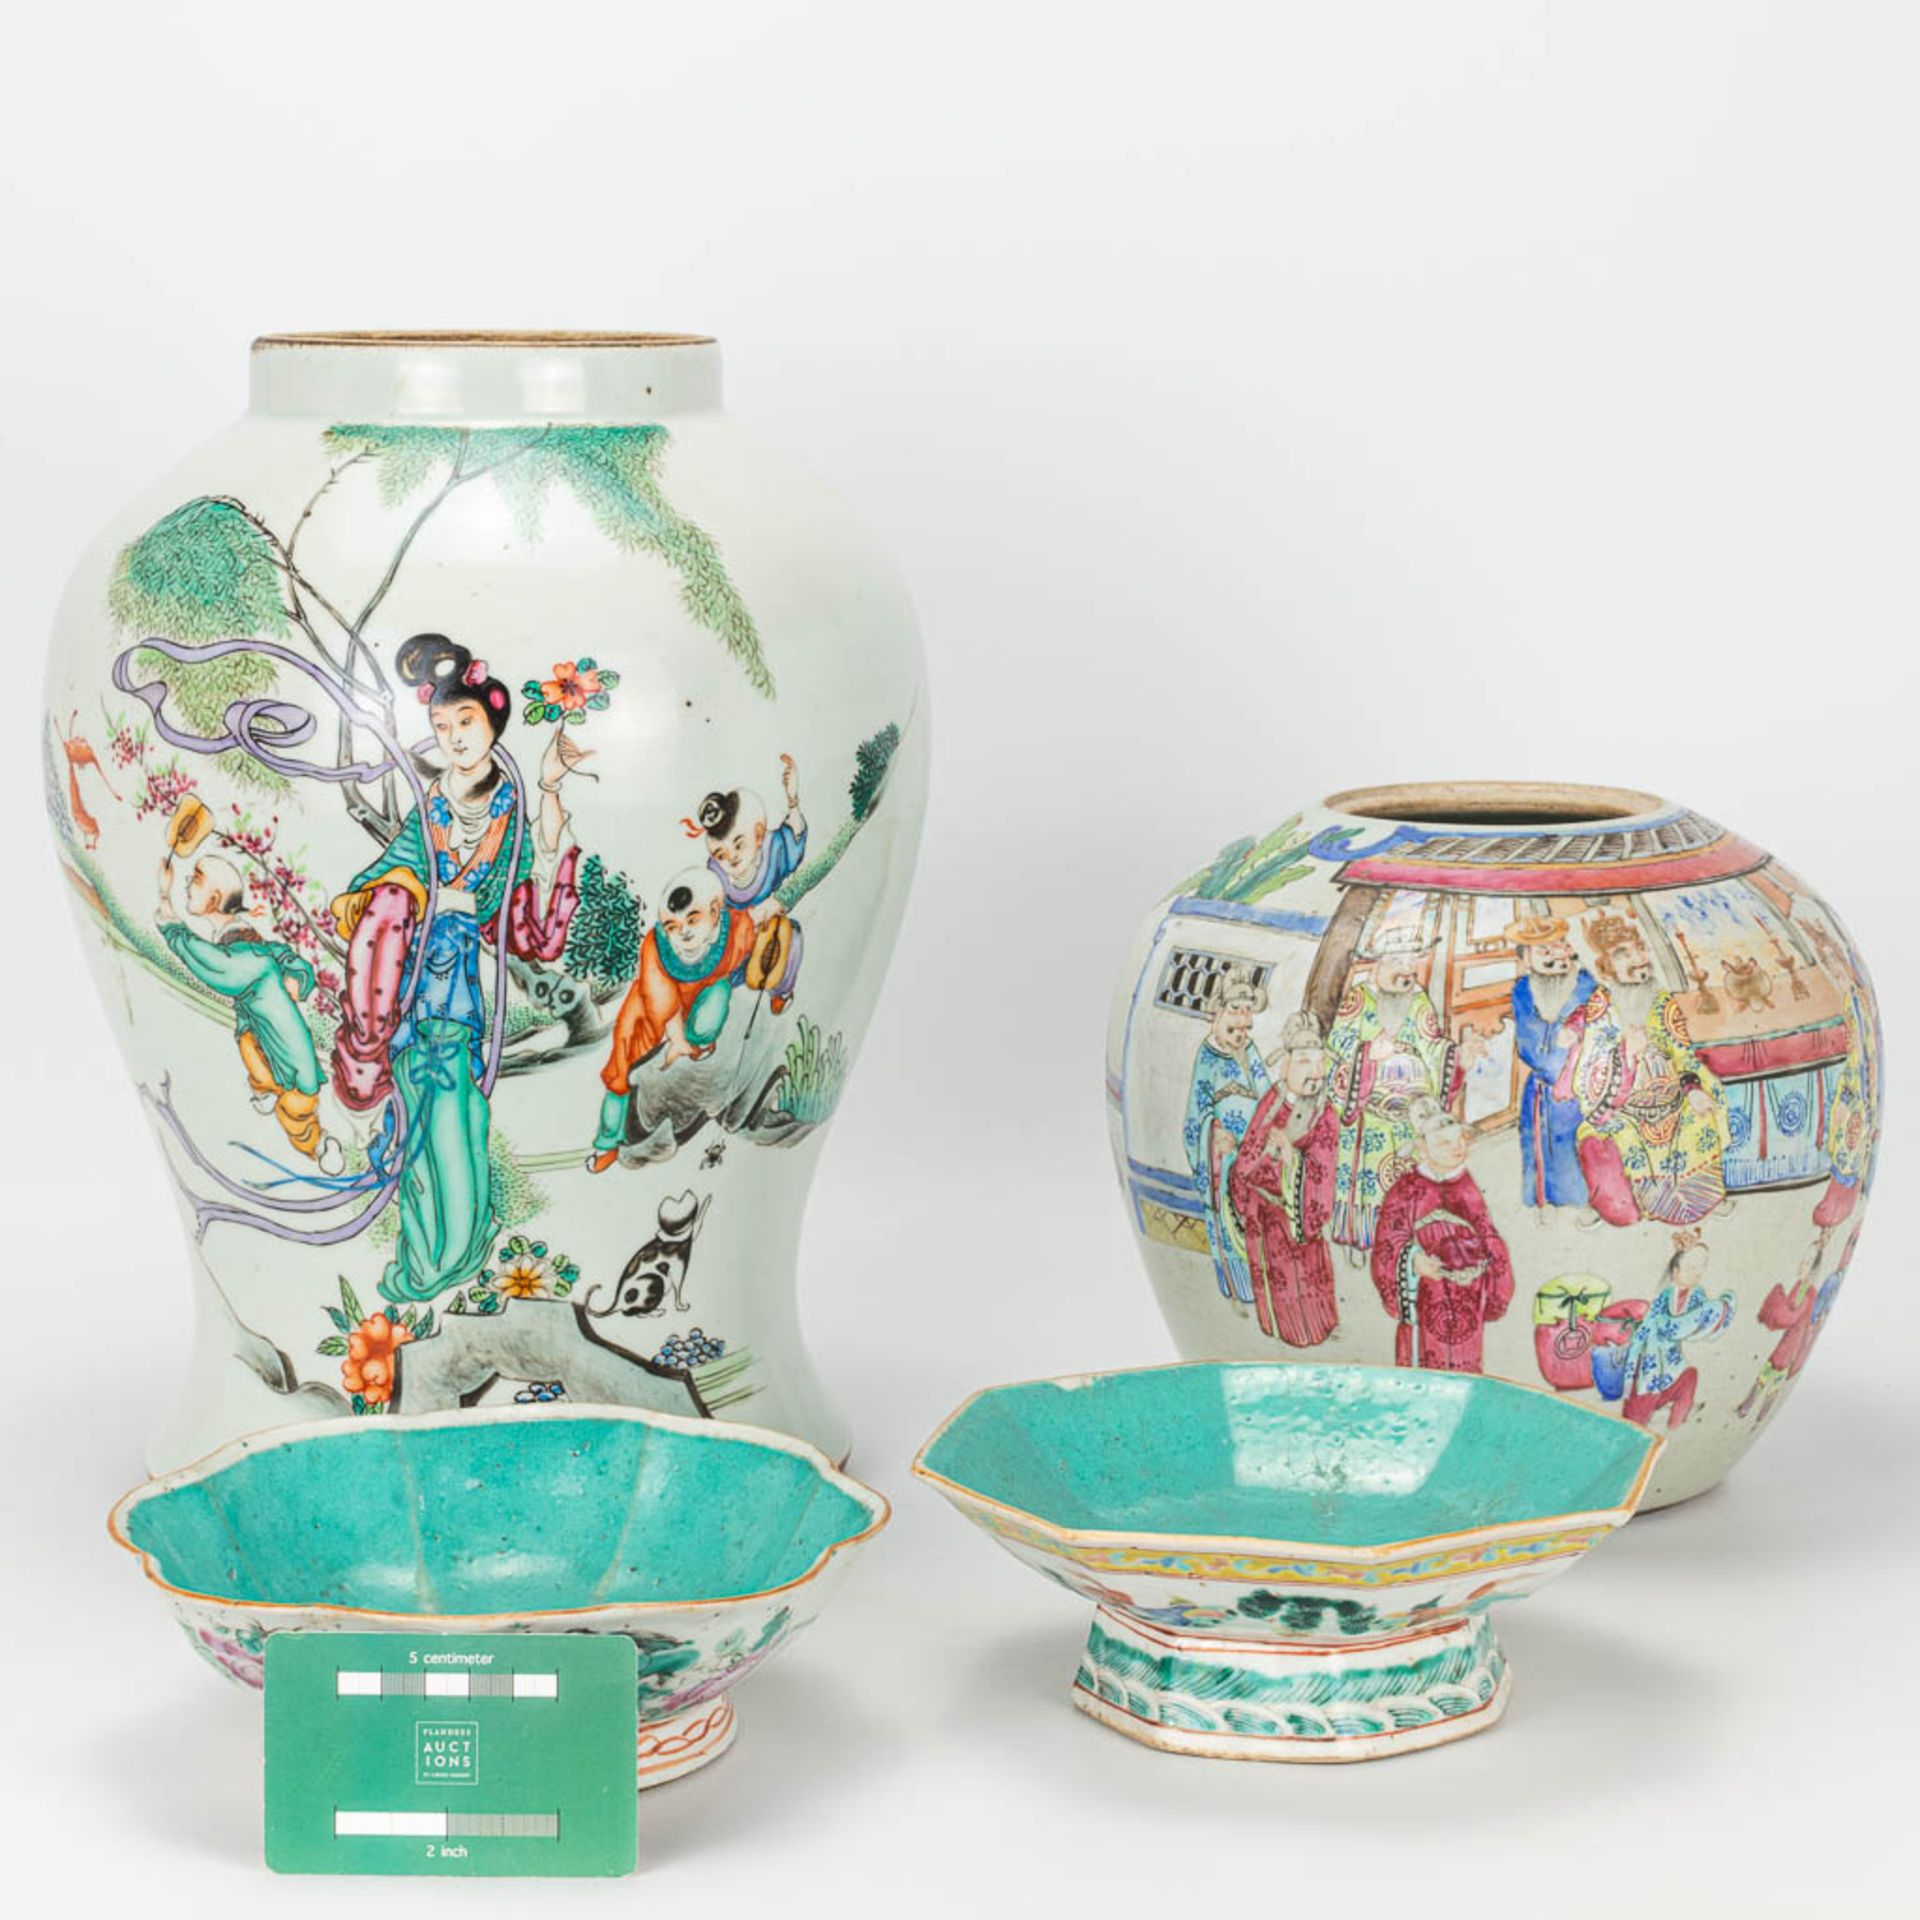 A set of 4 items made of Chinese porcelain. 2 small bowls and 2 ginger jars without lids. - Image 16 of 23